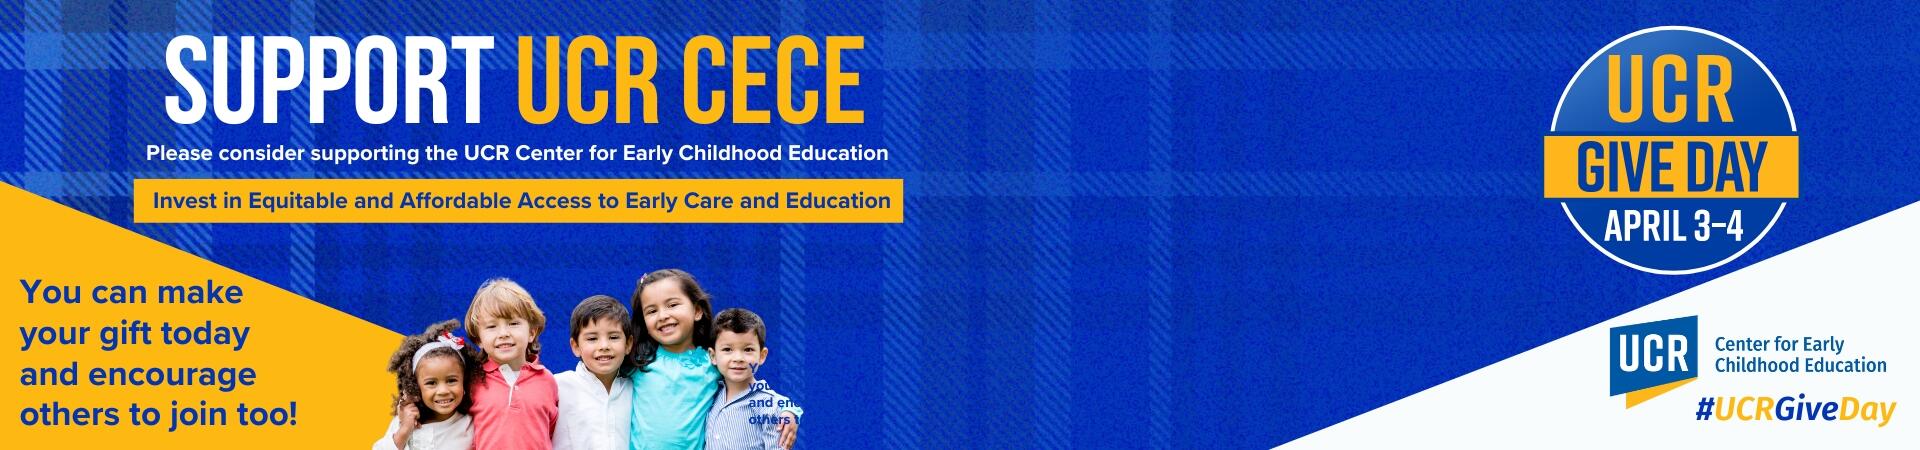 Support UCR CECE, Please consider supporting the UCR Center for Early Childhood Education, Invest in Equitable and Affordable Access to Early Care and Education, You can make your gift today and encourage others to join too! UCR Give Day